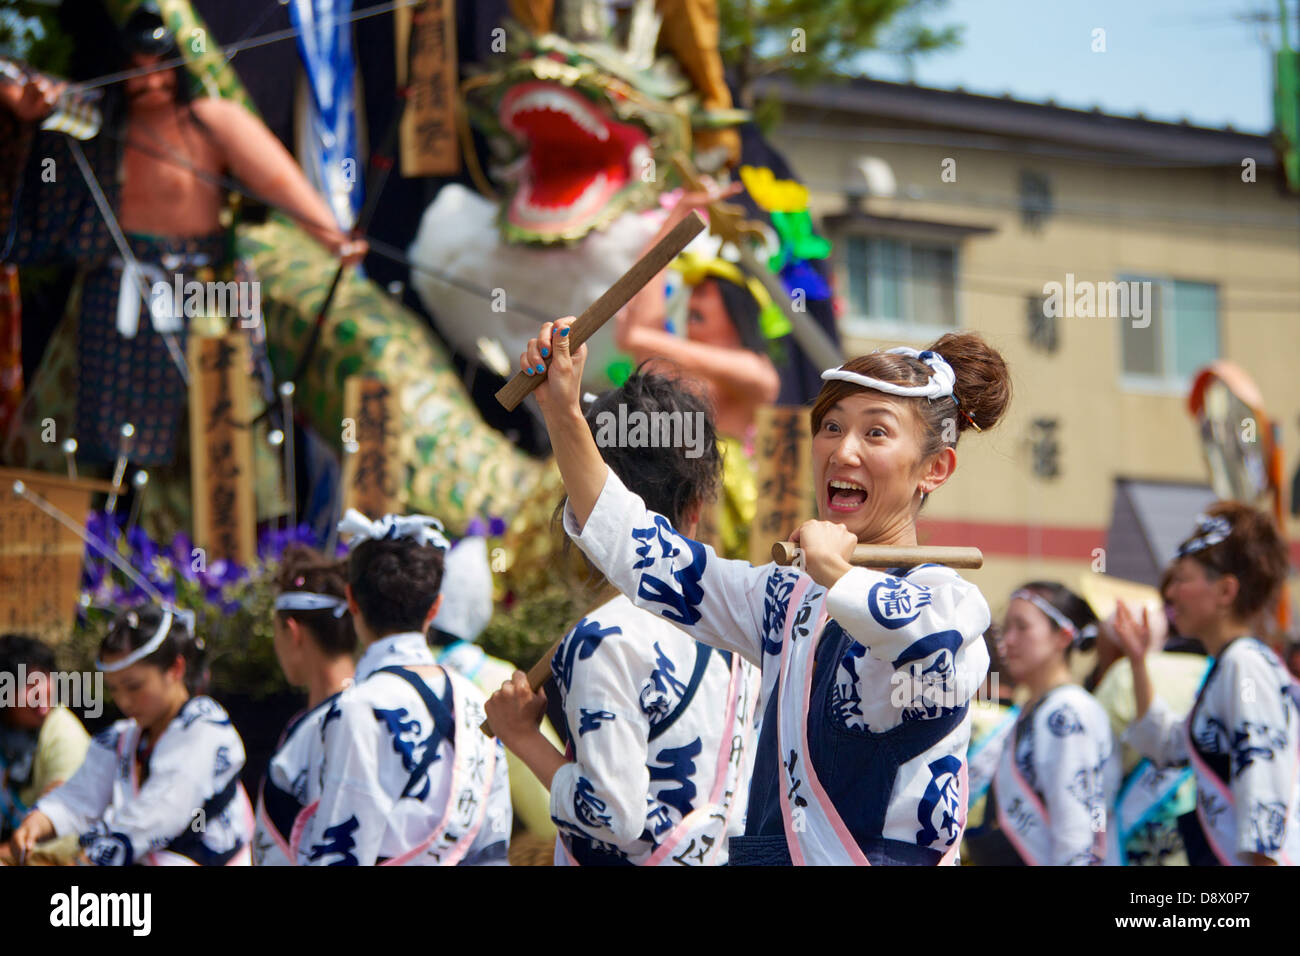 A Japanese lady holding her drum sticks in excitement during the Akita summer festival. She is a participant in the festival. Stock Photo